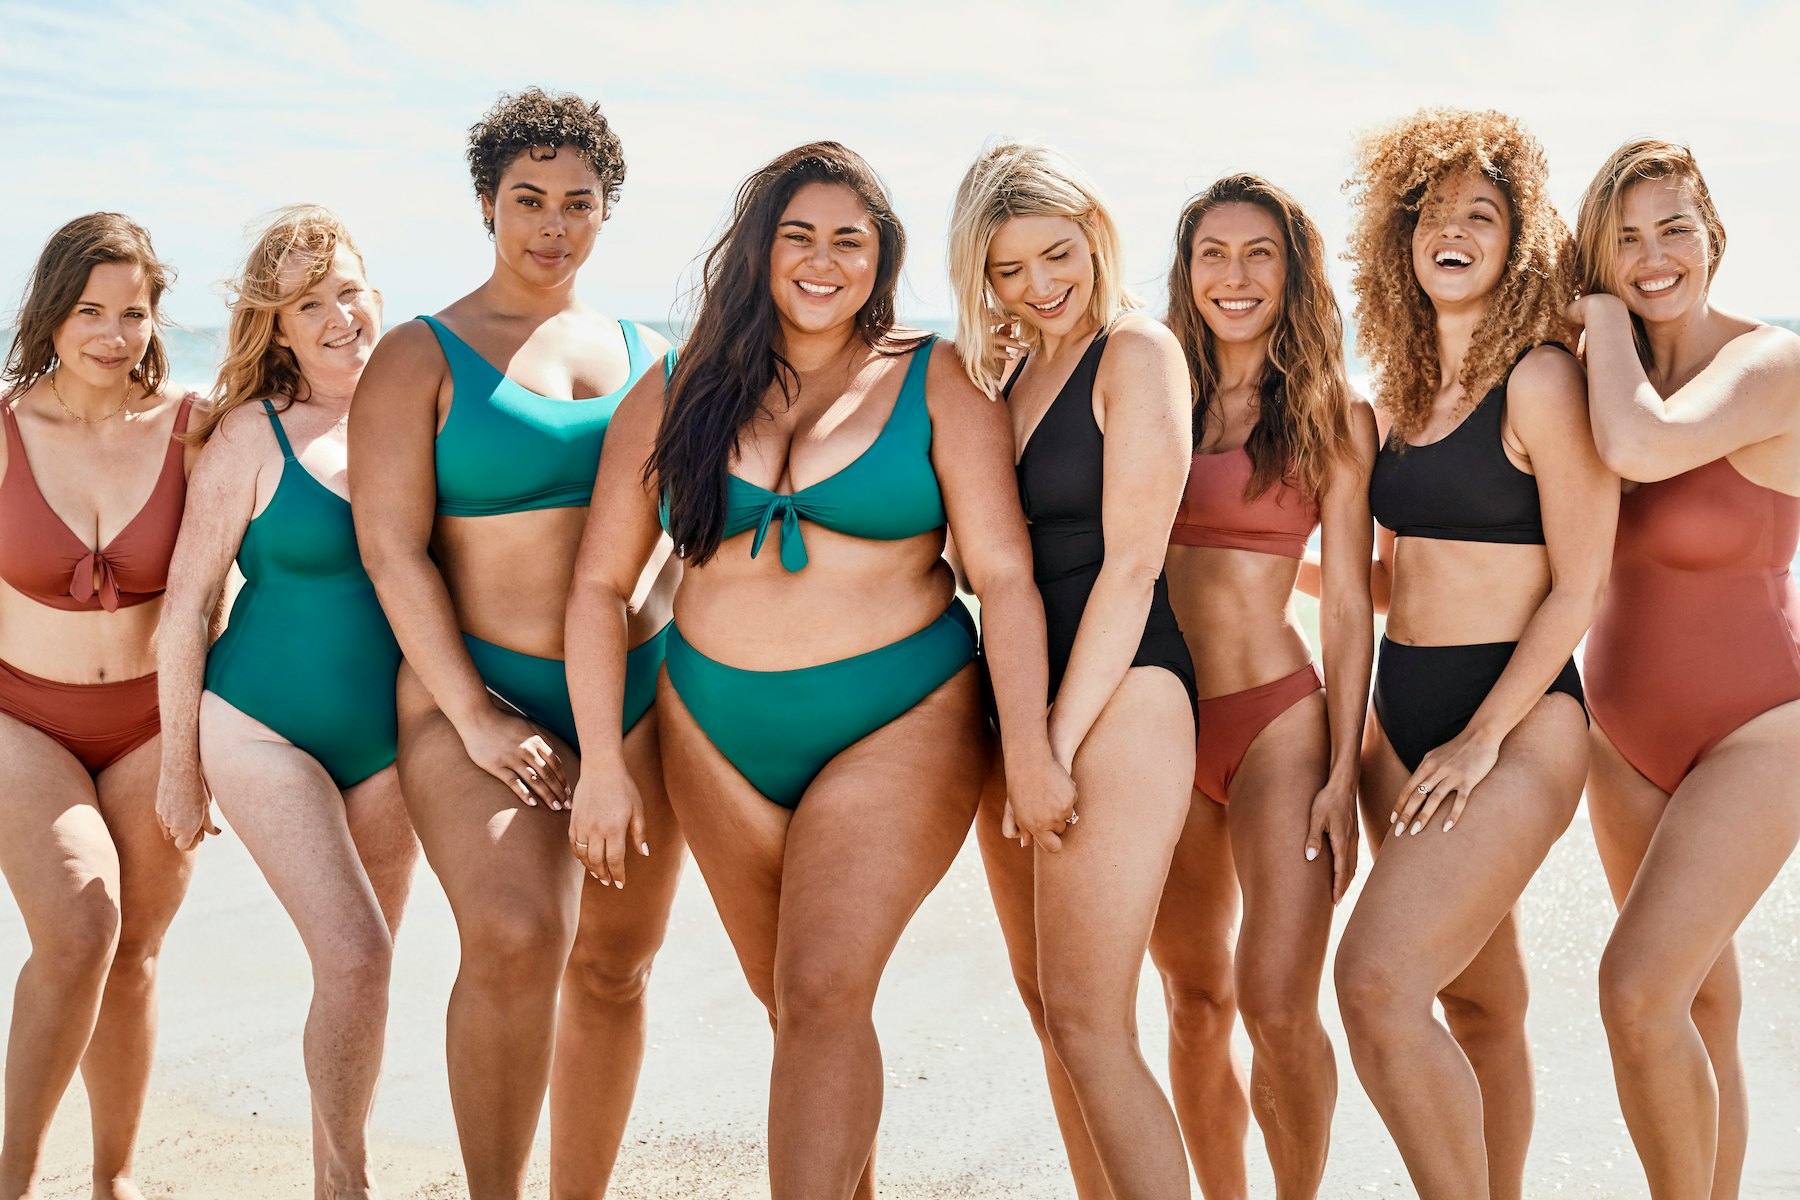 Knix's Swim Collection Just Launched For The First Time & It's As  Comfortable As It Is Stylish